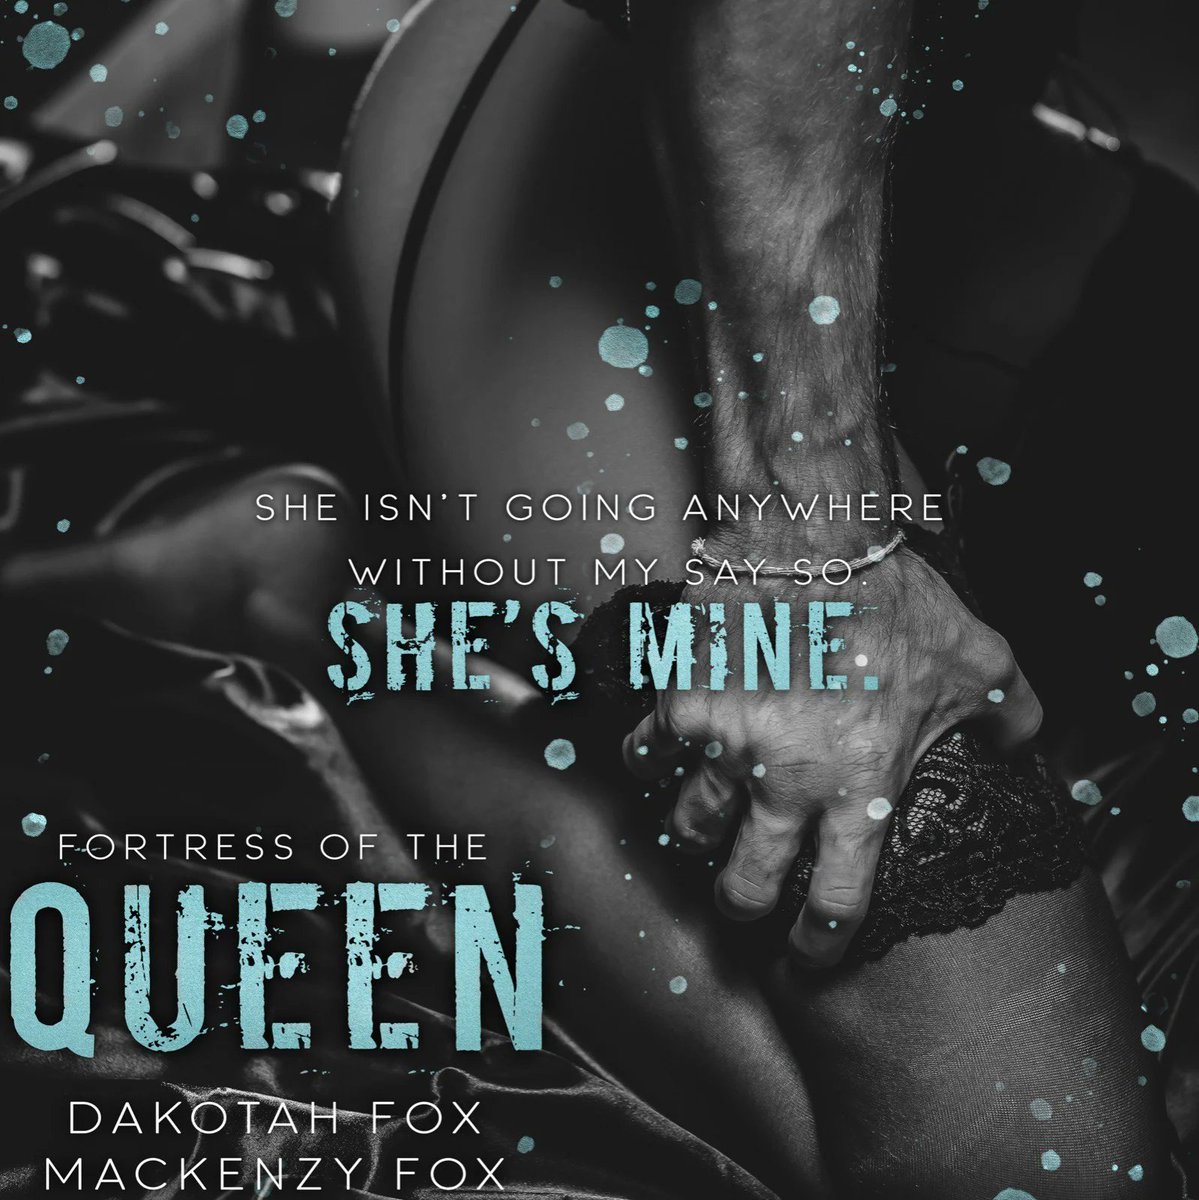 TEASER: FORTRESS OF THE QUEEN by #dakotahfox and #mackenzyfox is available on Amazon and KU! This is part 2 of a duet that must be read in order!

#OneClick  bit.ly/3QNOV5Z

 #antihero #alphahero #mackenzyfox #dakotahfox  #cliffhanger #theauthoragency @theauthoragency